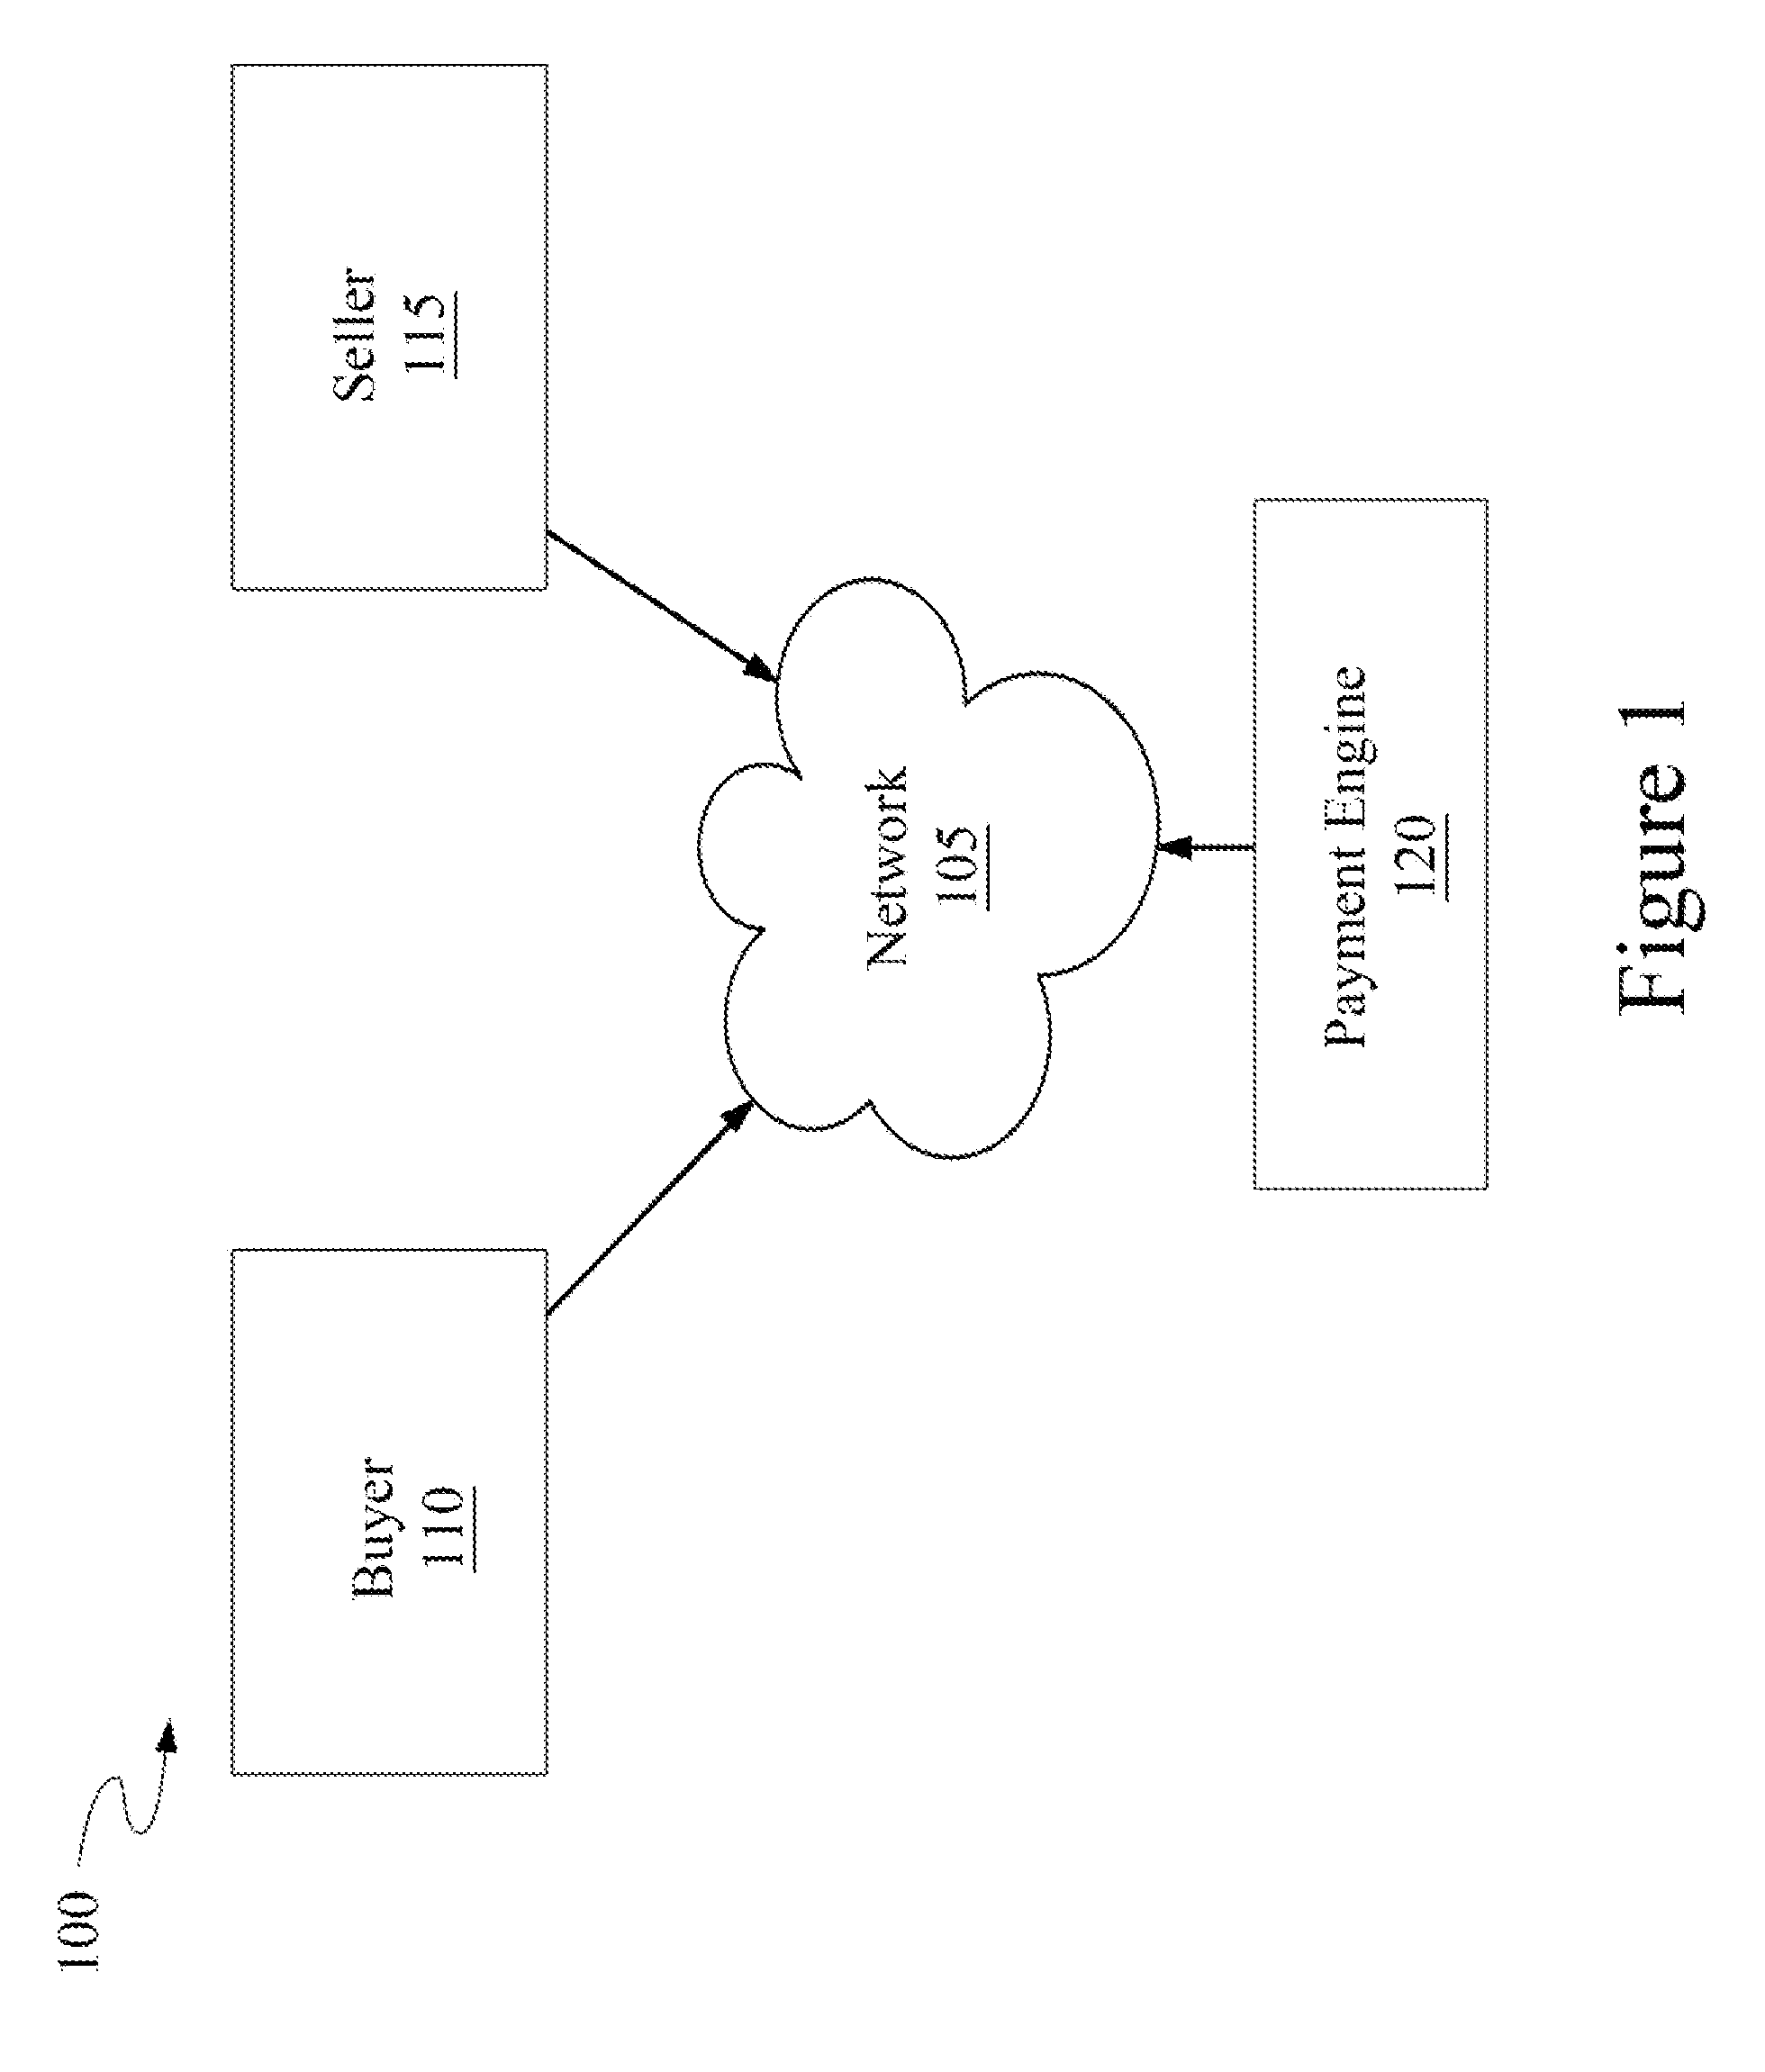 Systems and methods for completing a financial transaction